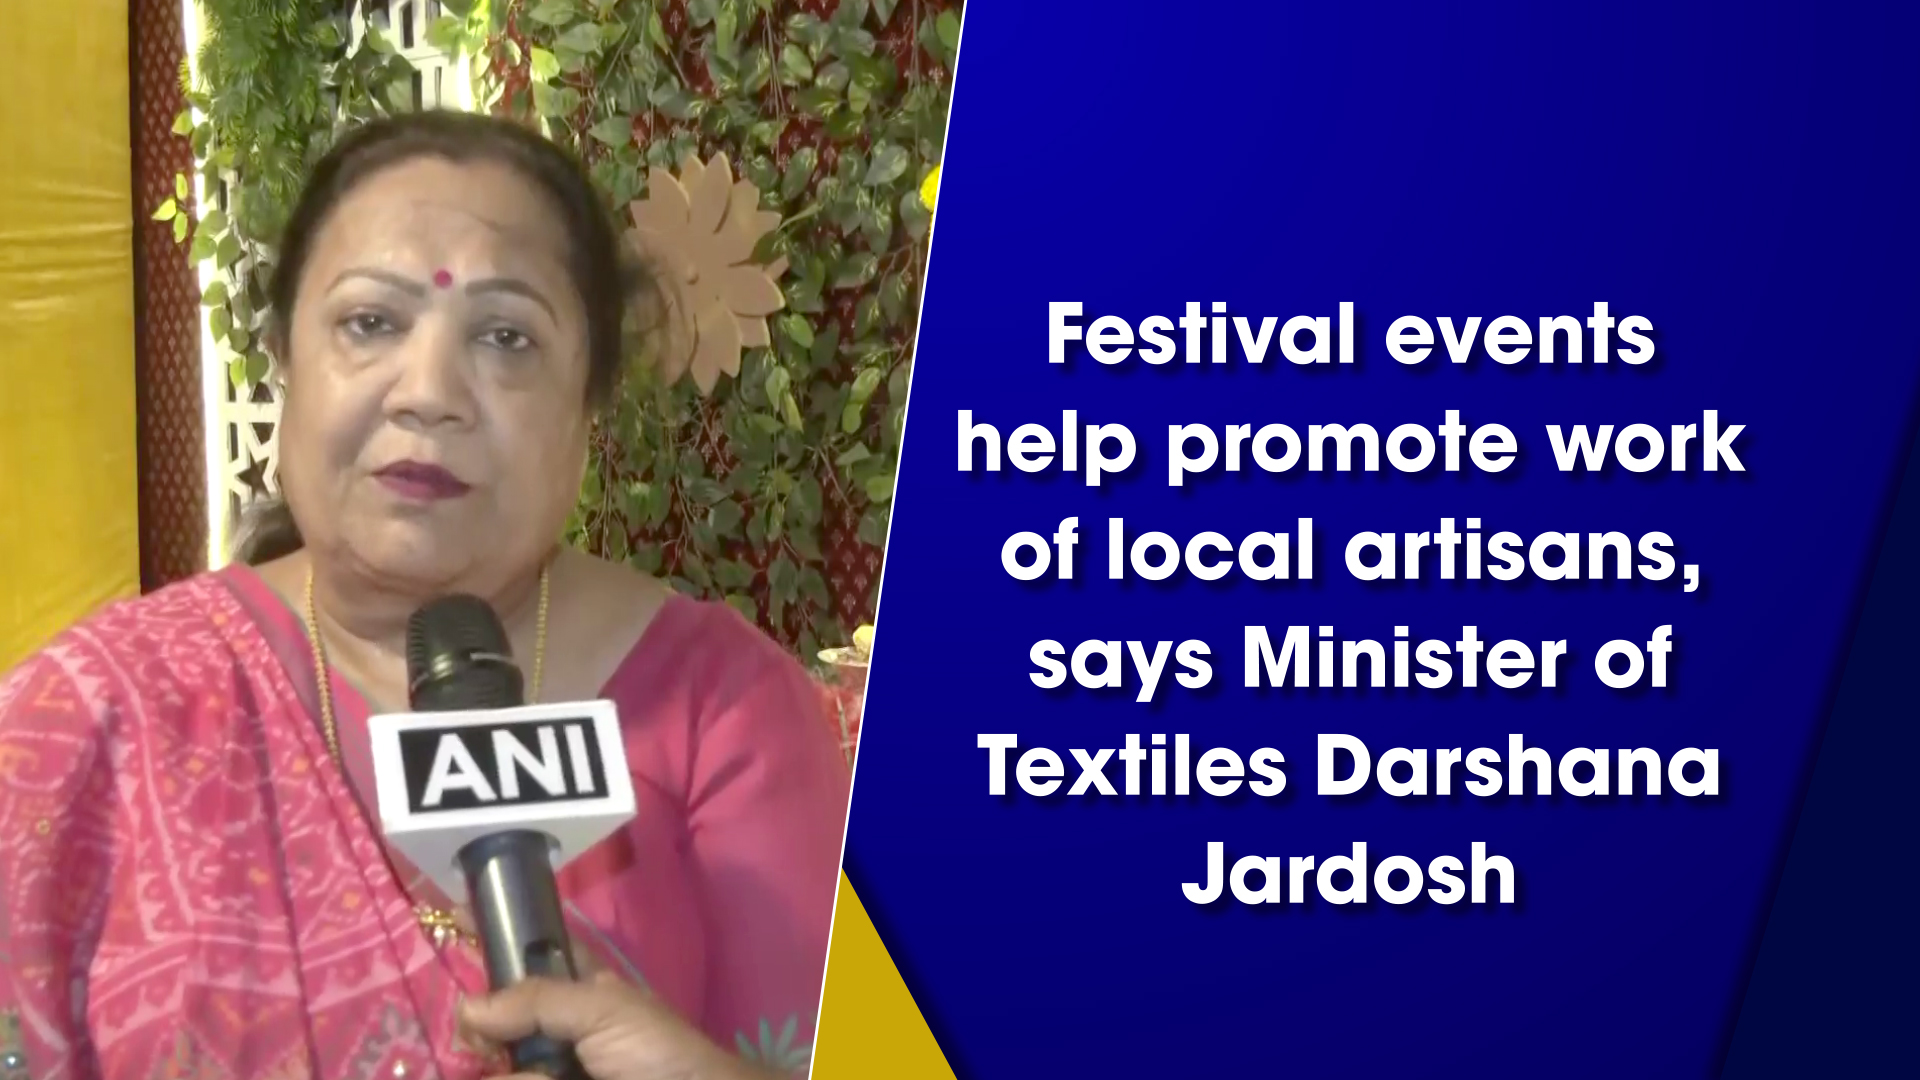 Festival events help promote work of local artisans, says Minister of Textiles Darshana Jardosh